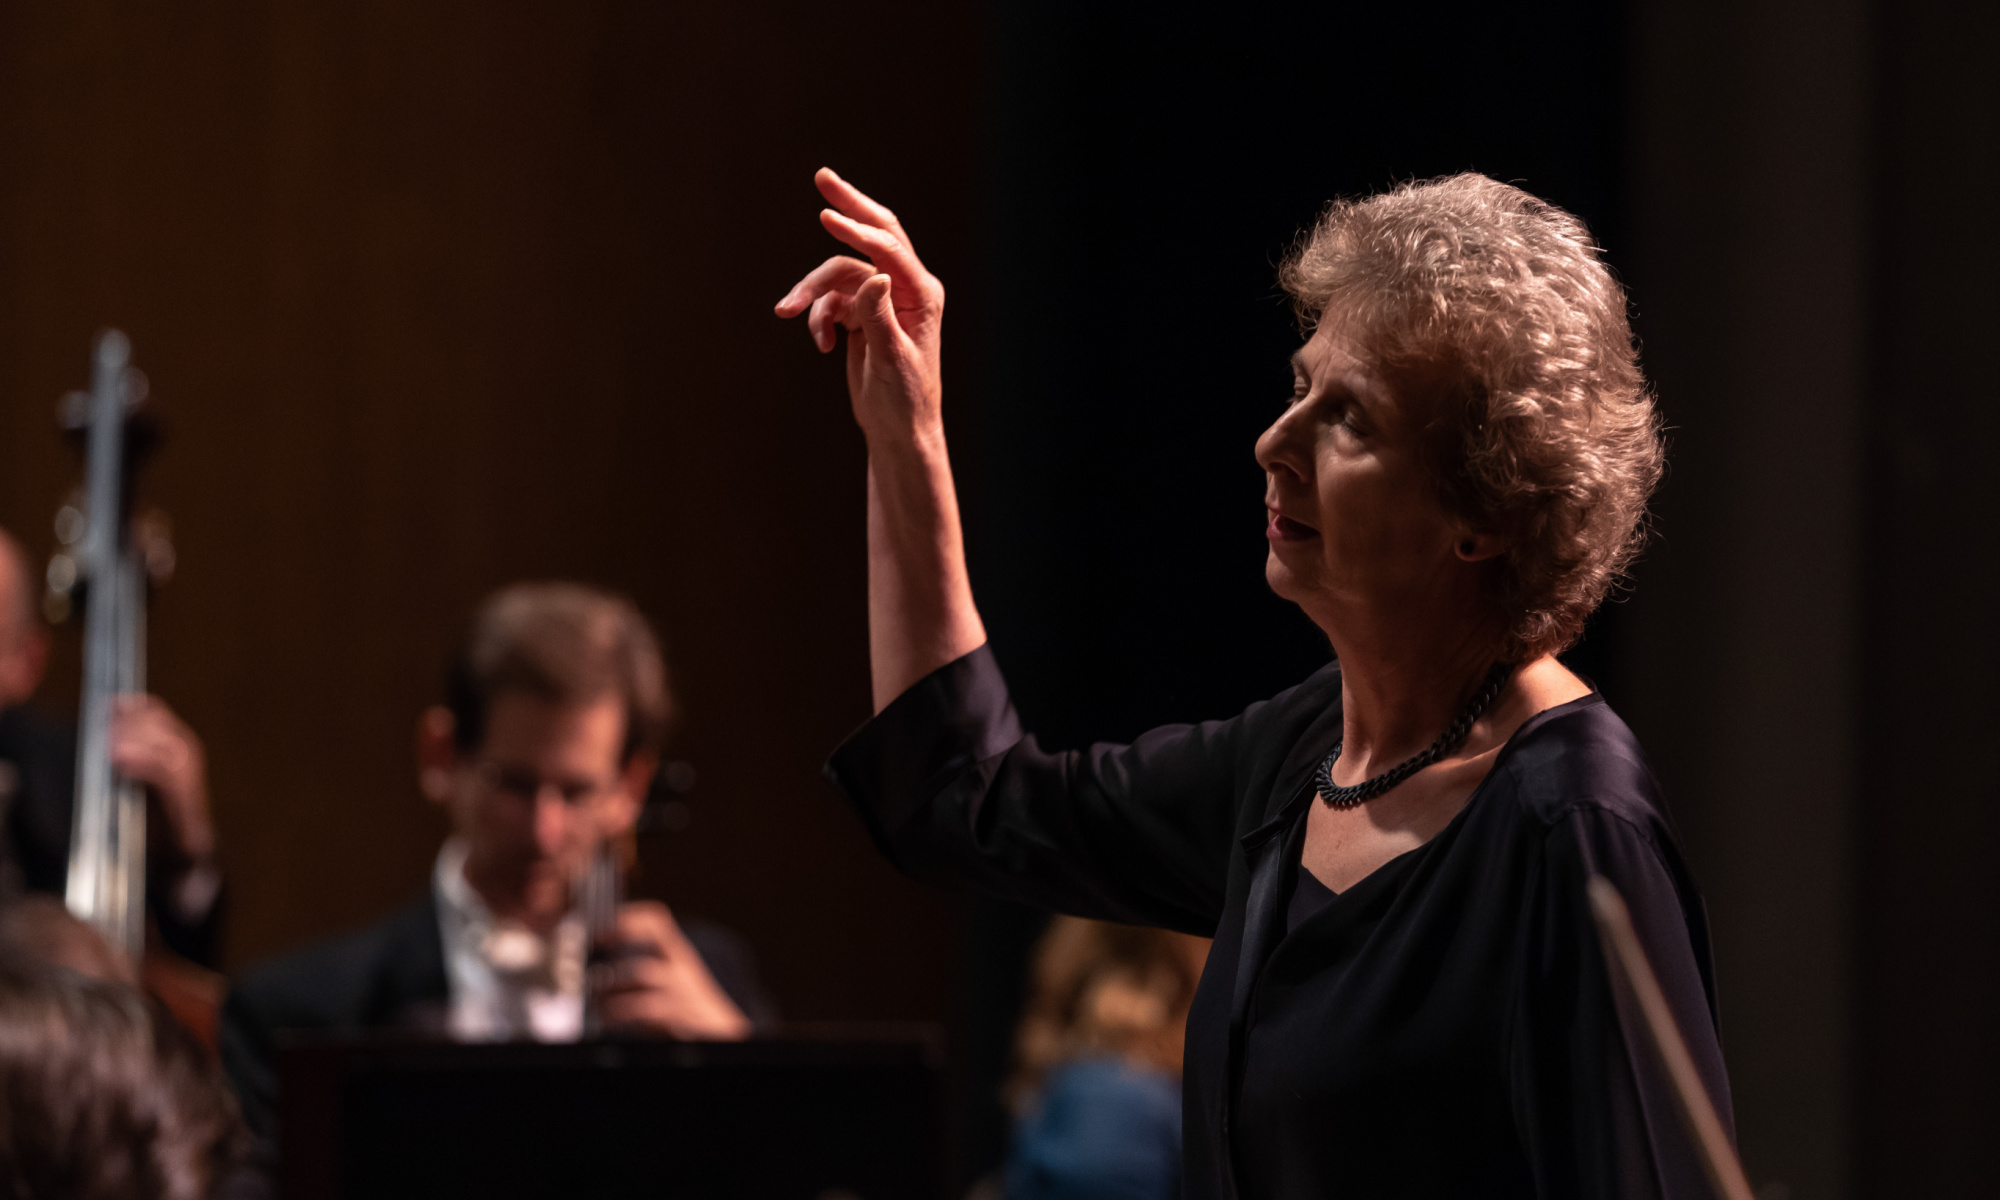 Dame Jane Glover stands with her eyes closed and right arm raised, mid-conducting.